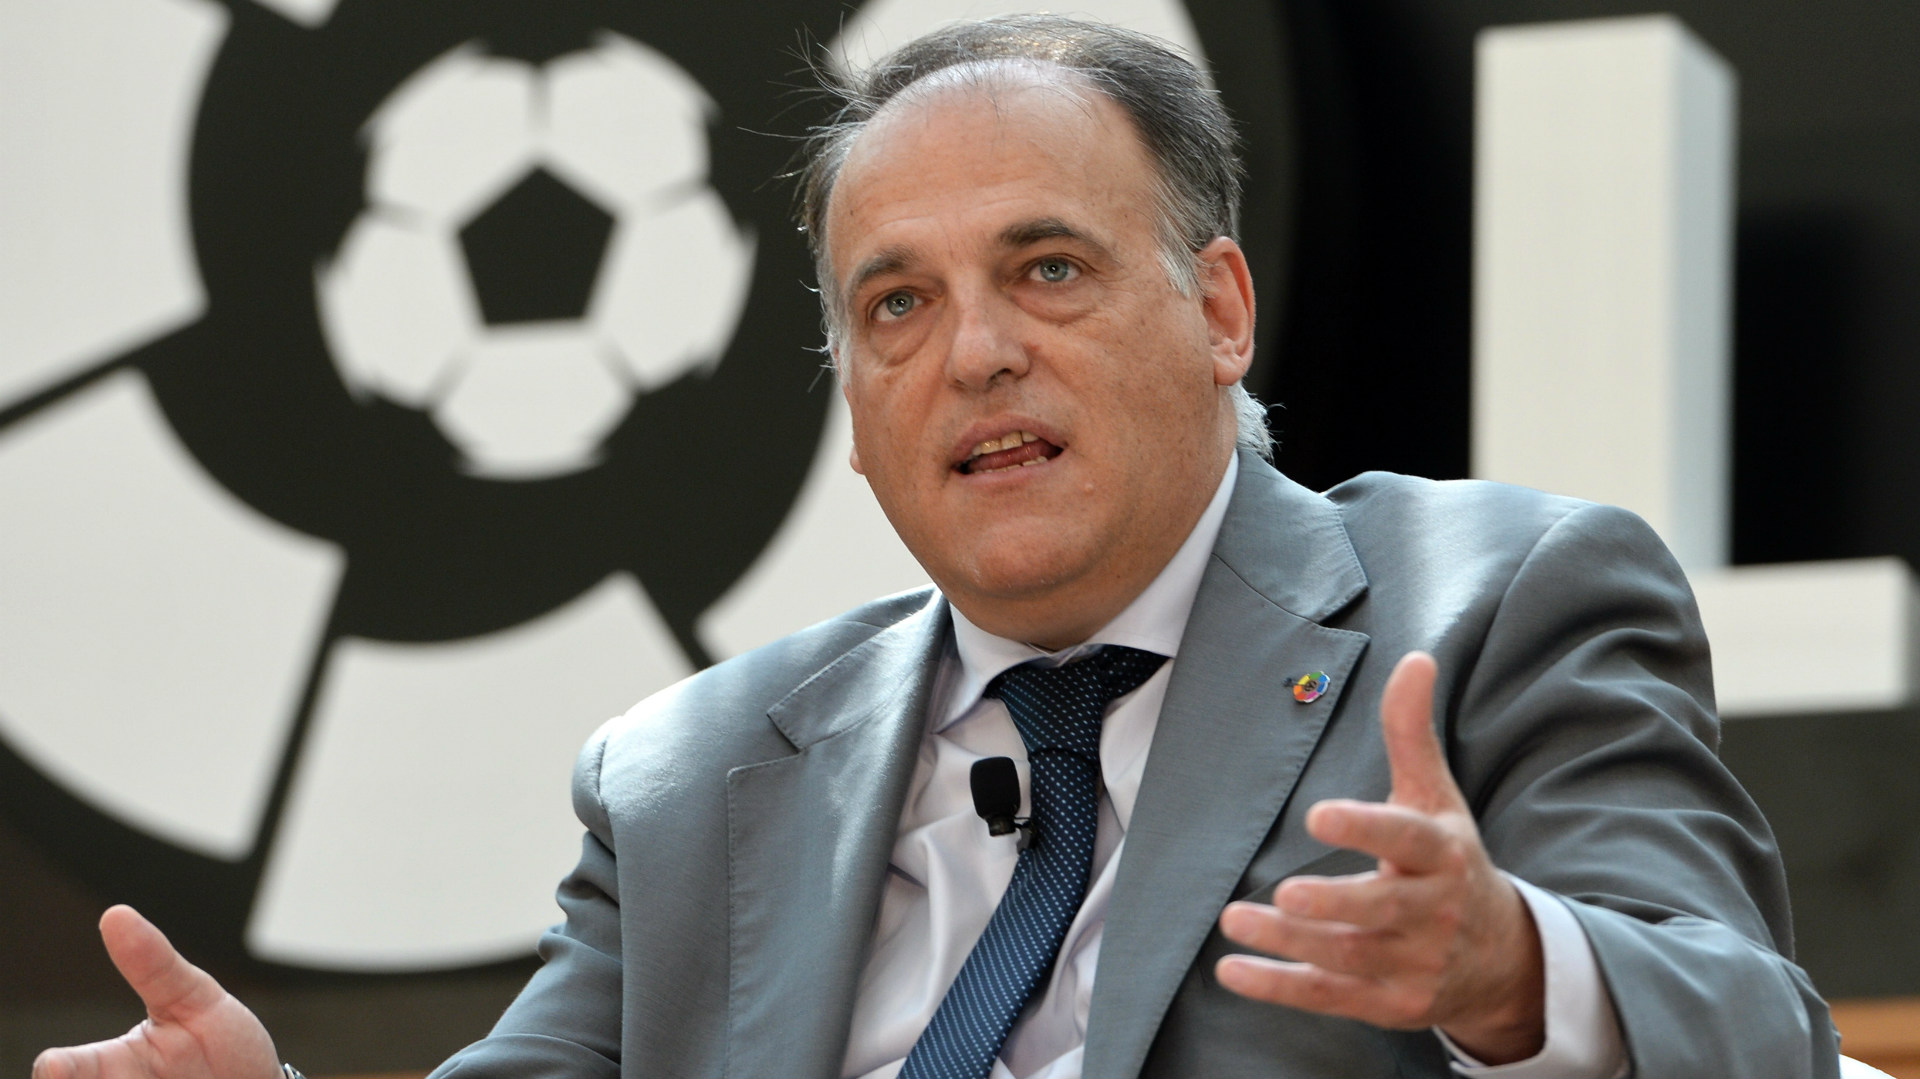 Mbappe's PSG stay 'an insult to football', fumes La Liga president Tebas